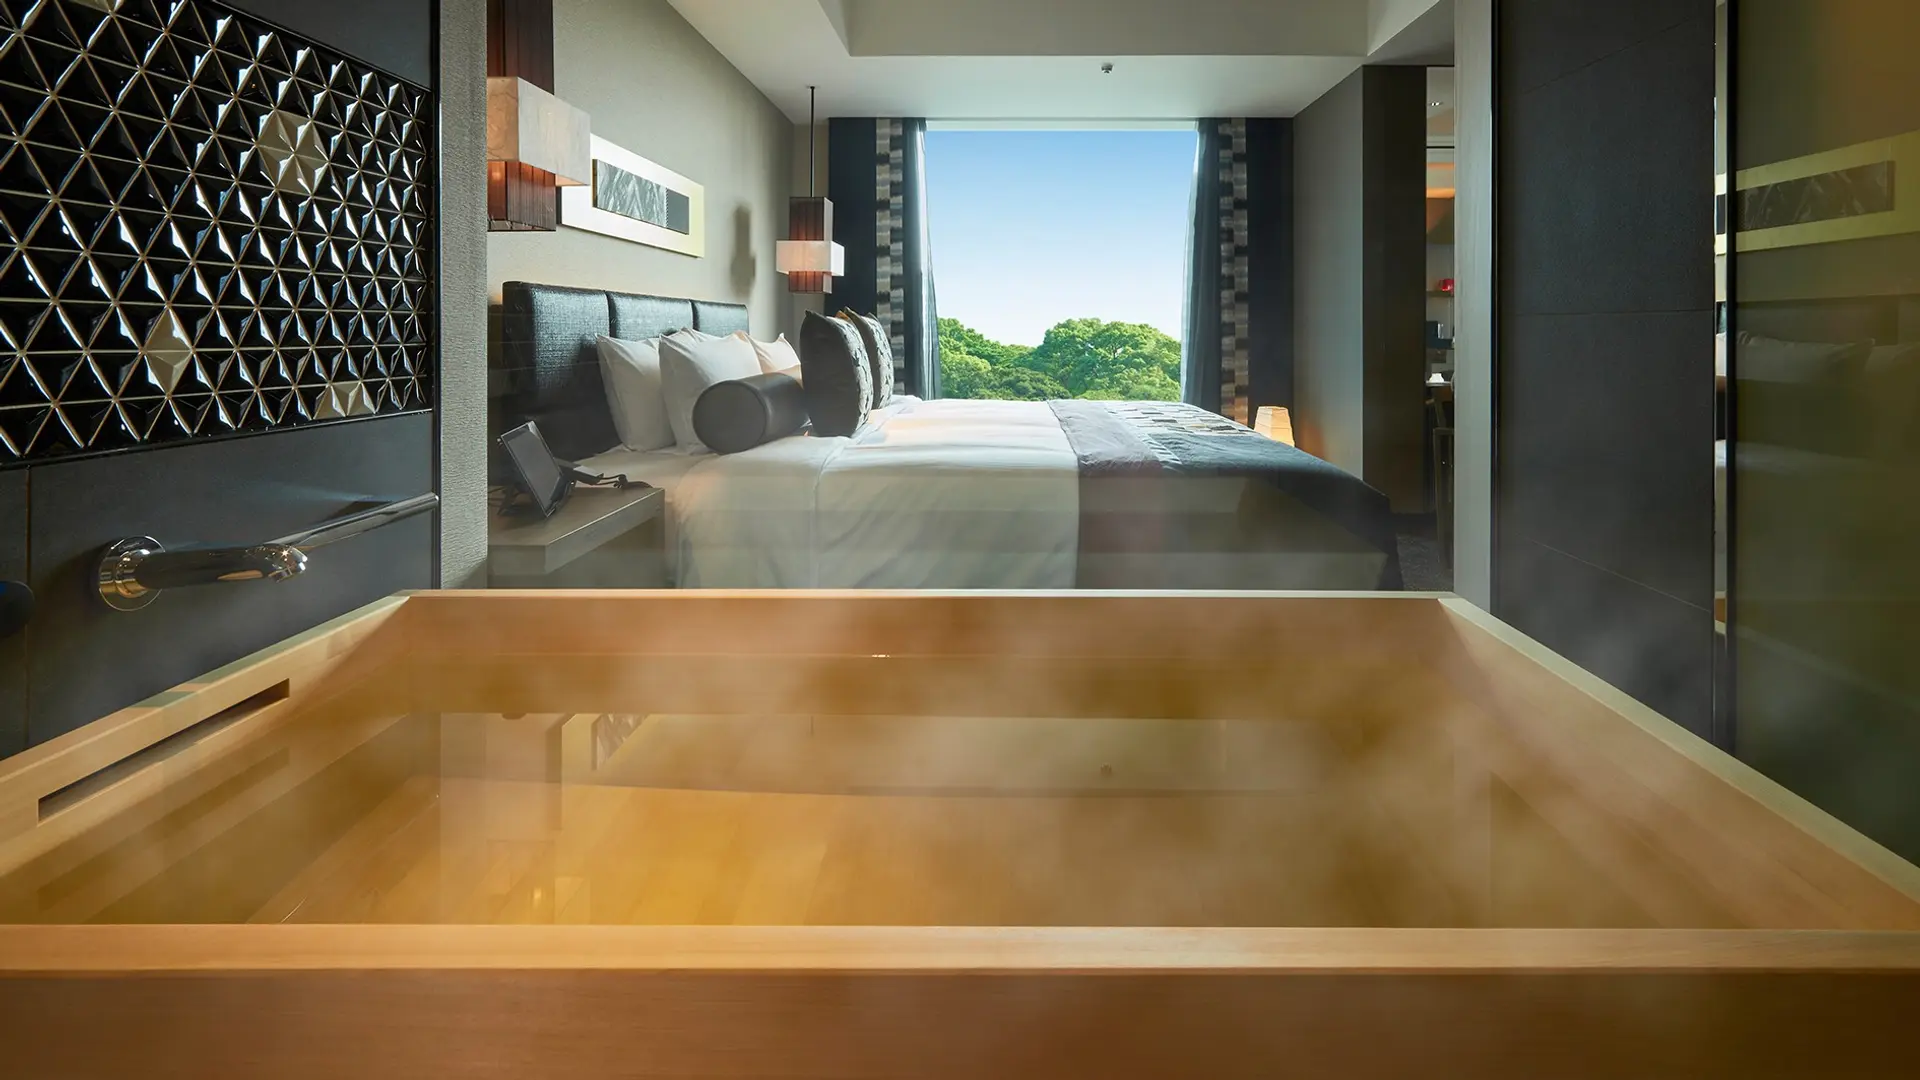 Modern tree looking bathtub with kingsize bed and view to trees in nTokyo at New Otani, Tokyo.